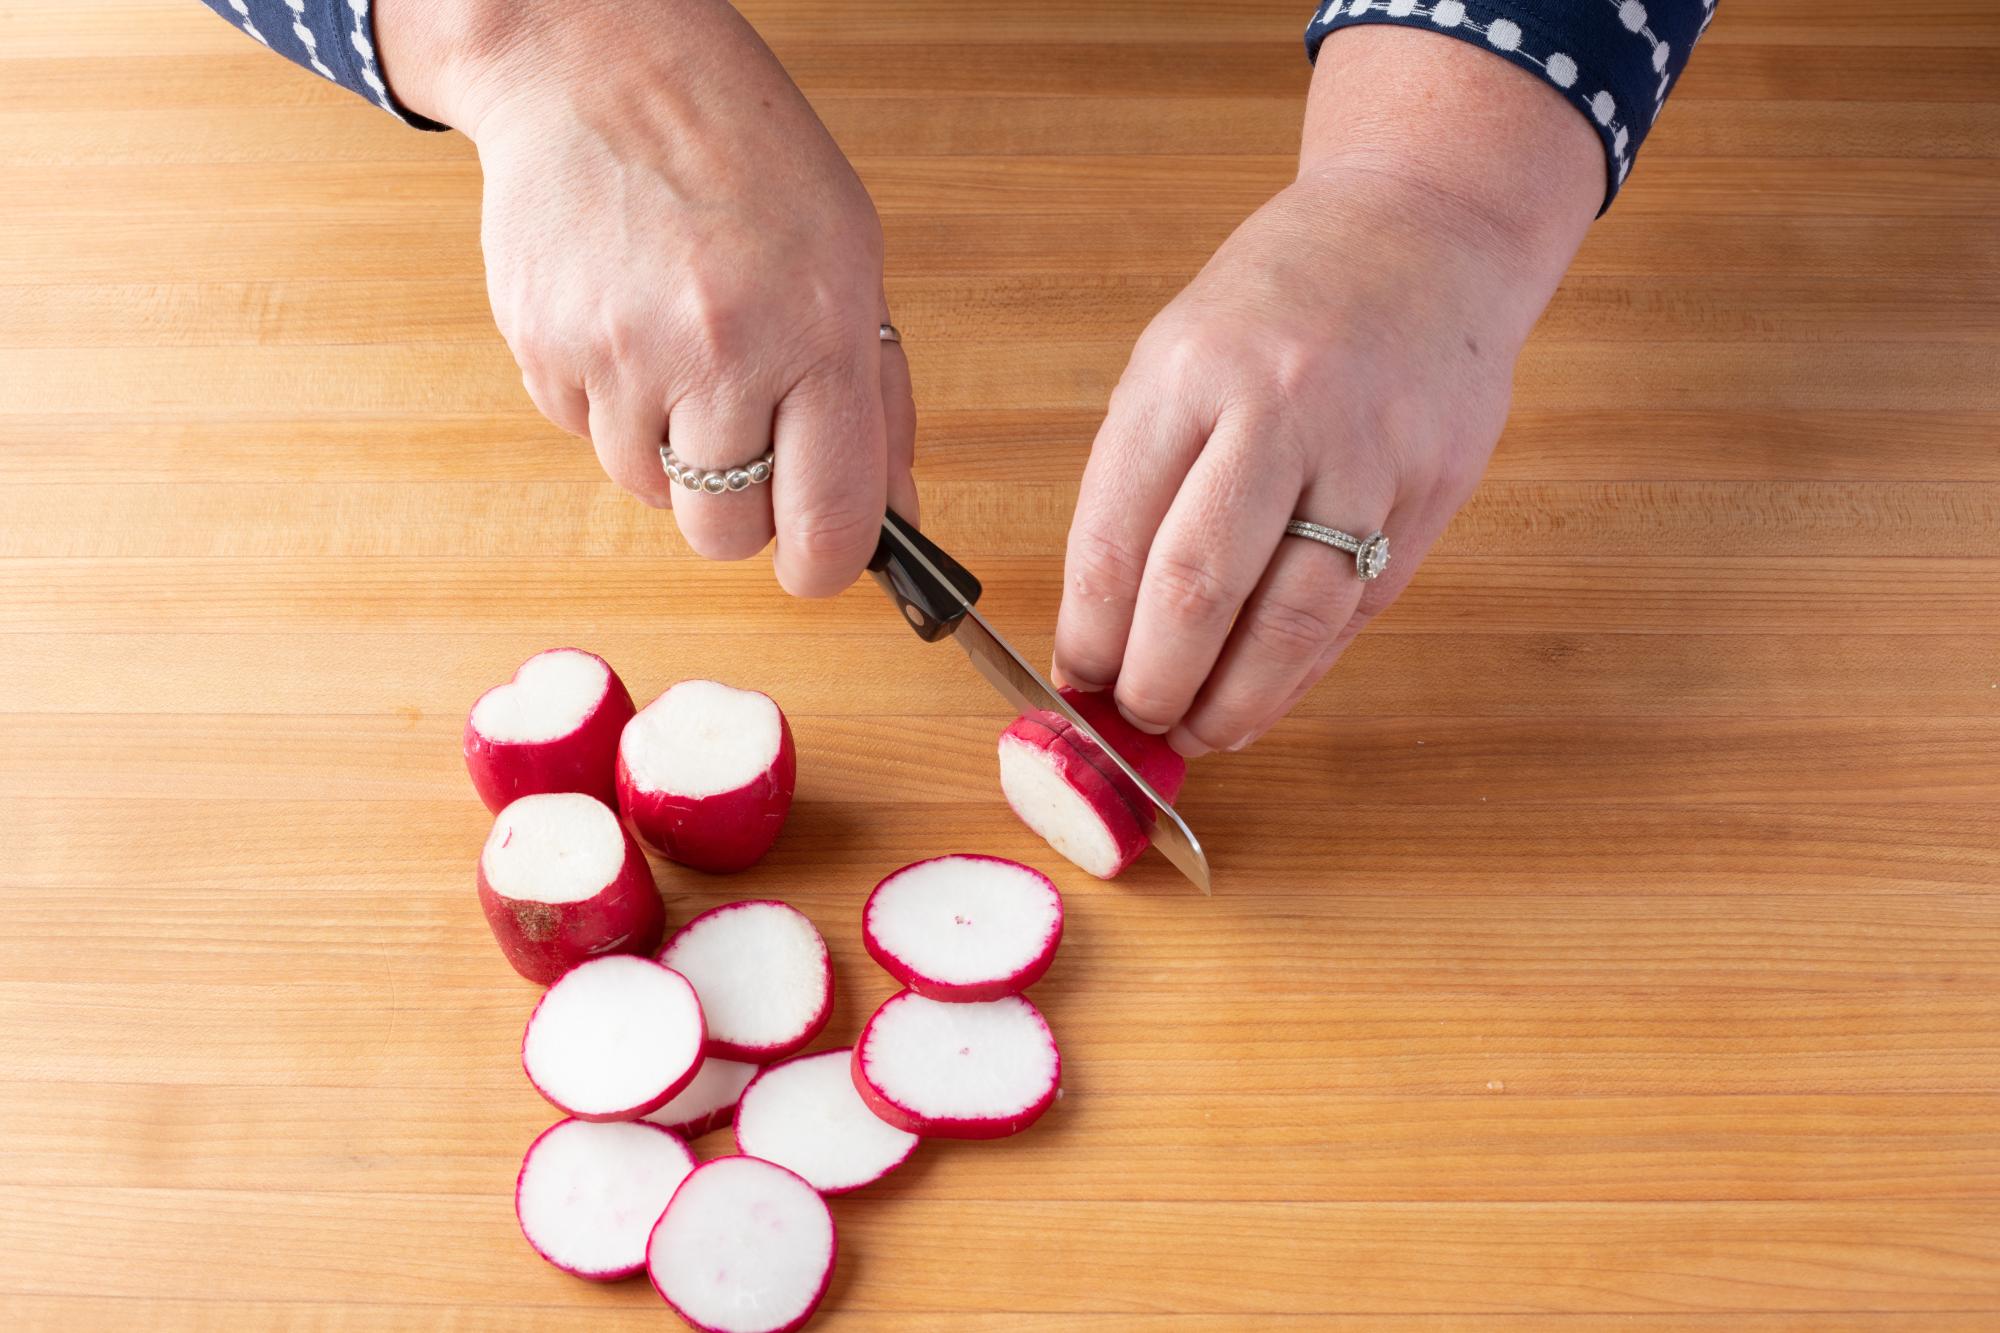 Slicing the radish with a Santoku-Style Paring Knife.